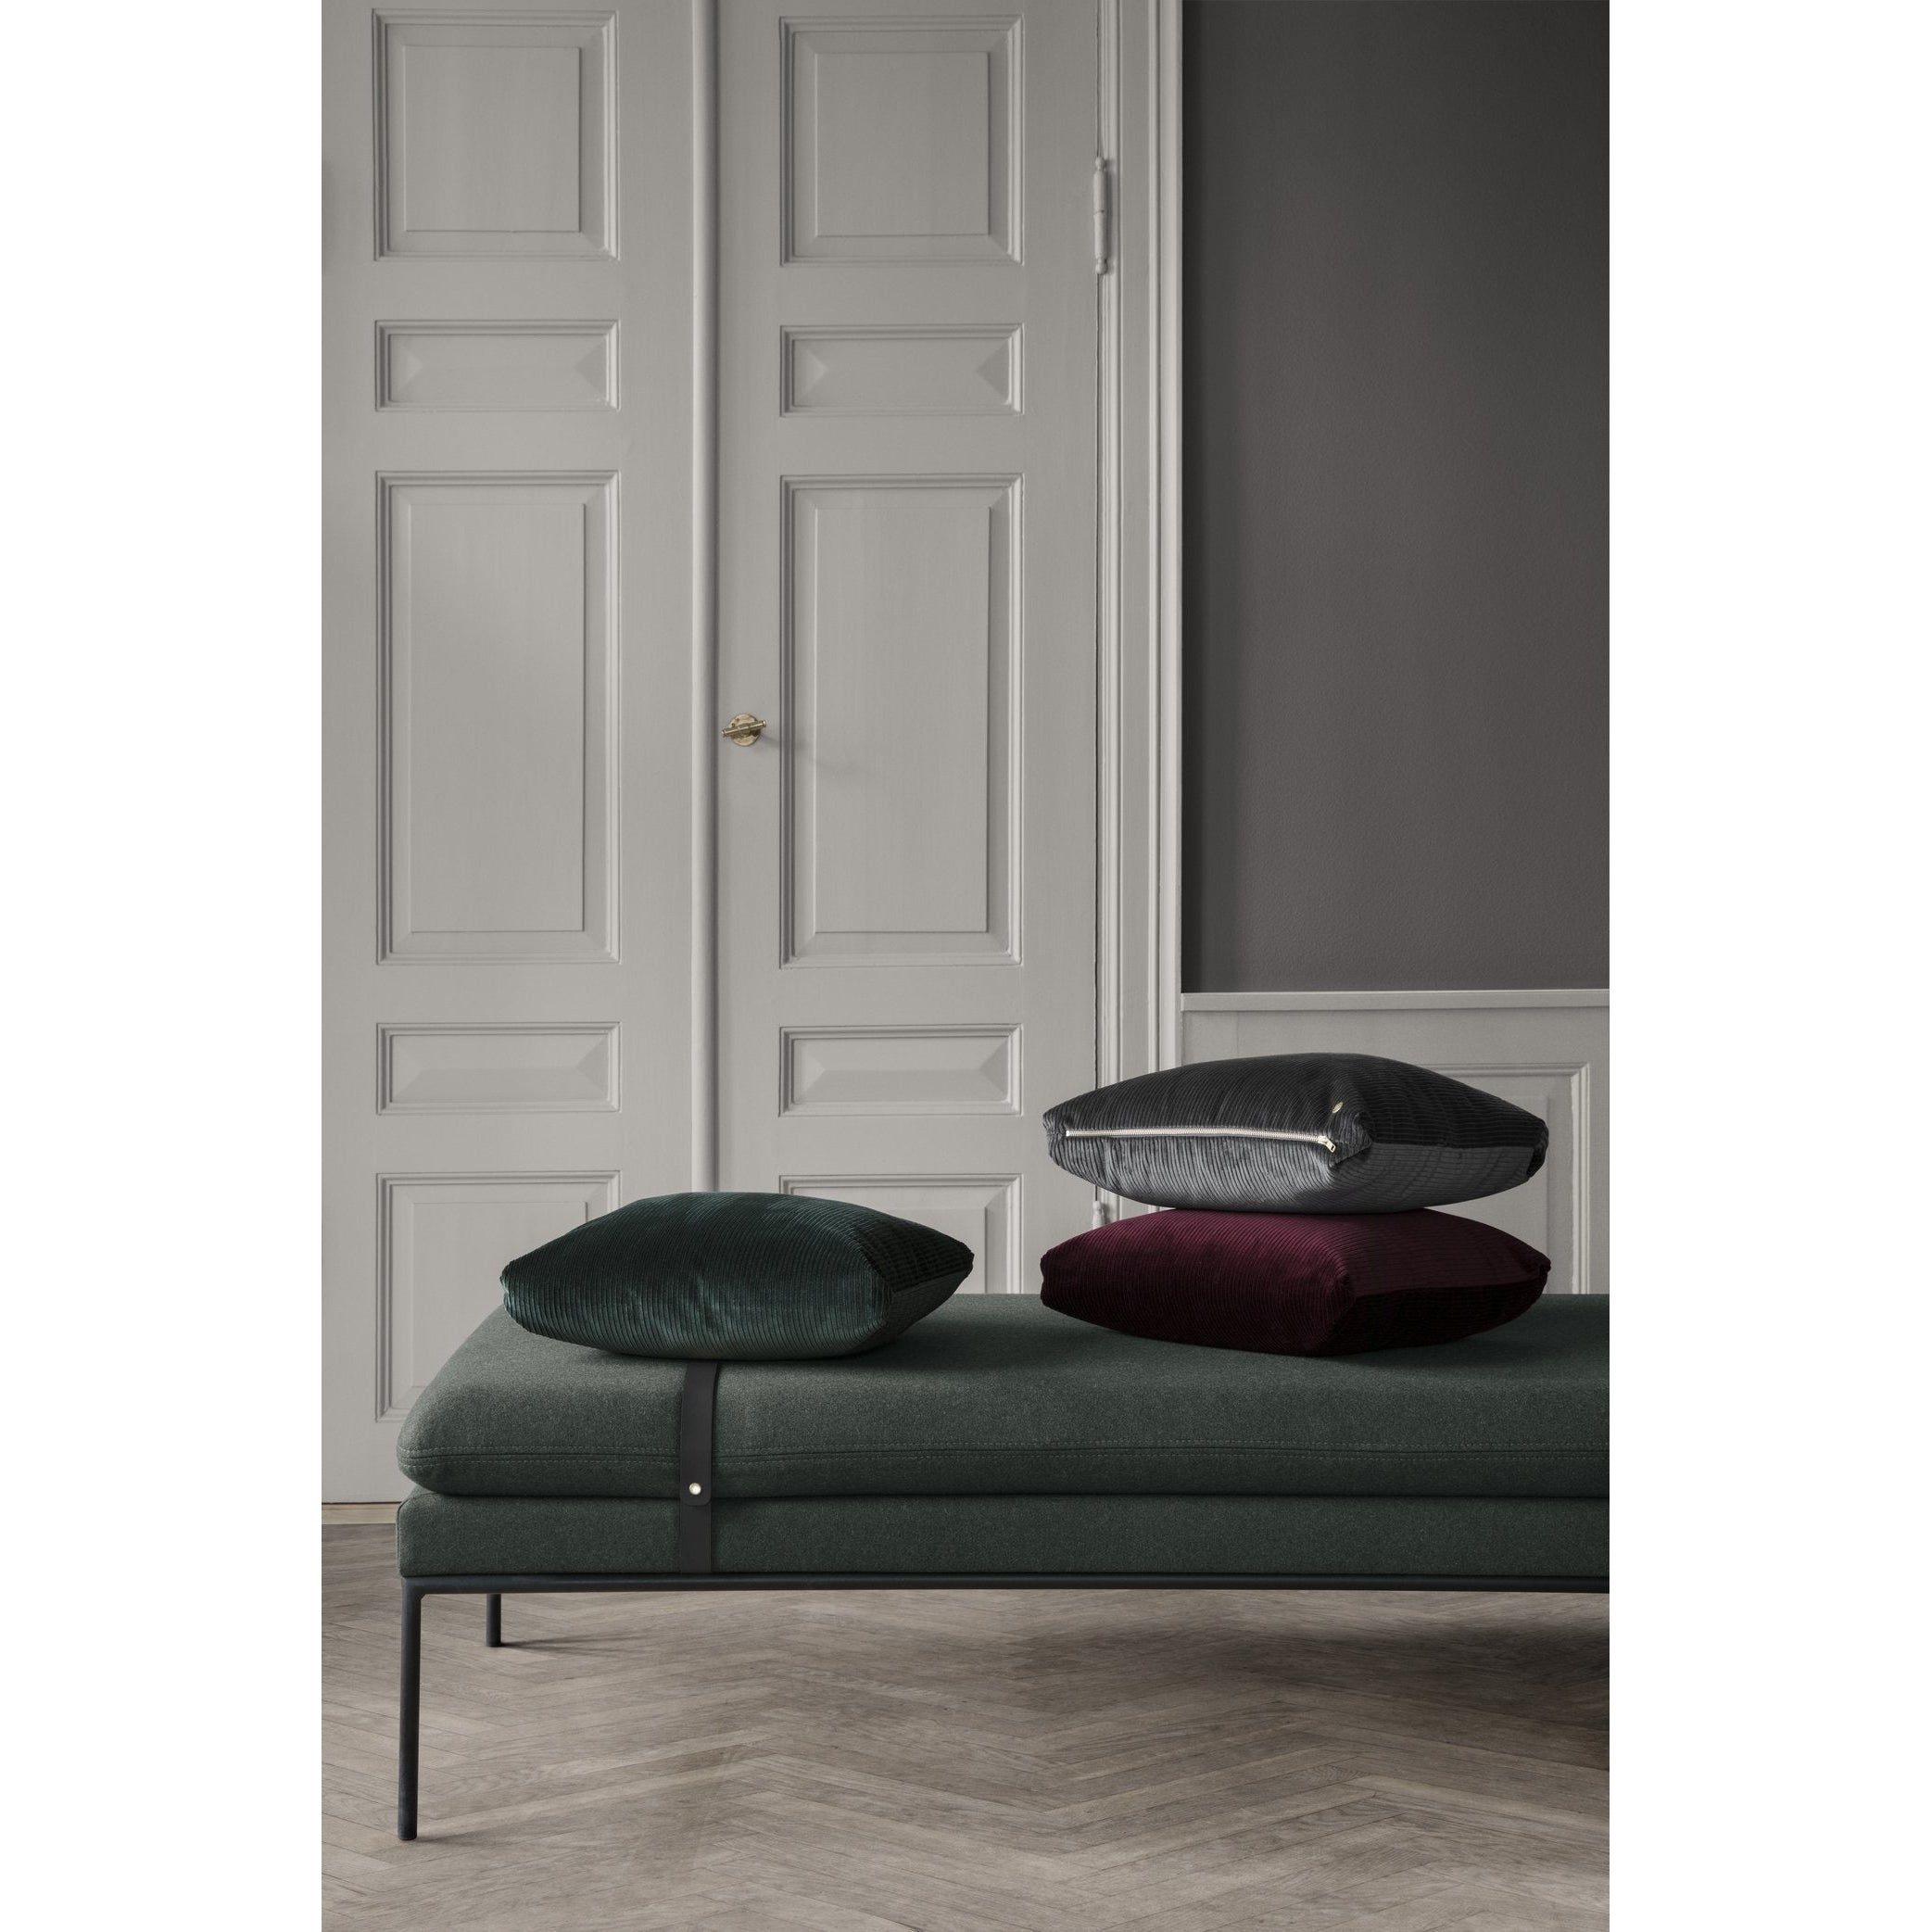 Ferm Living Turn Bed Bed Fiord, Solid Dark Green